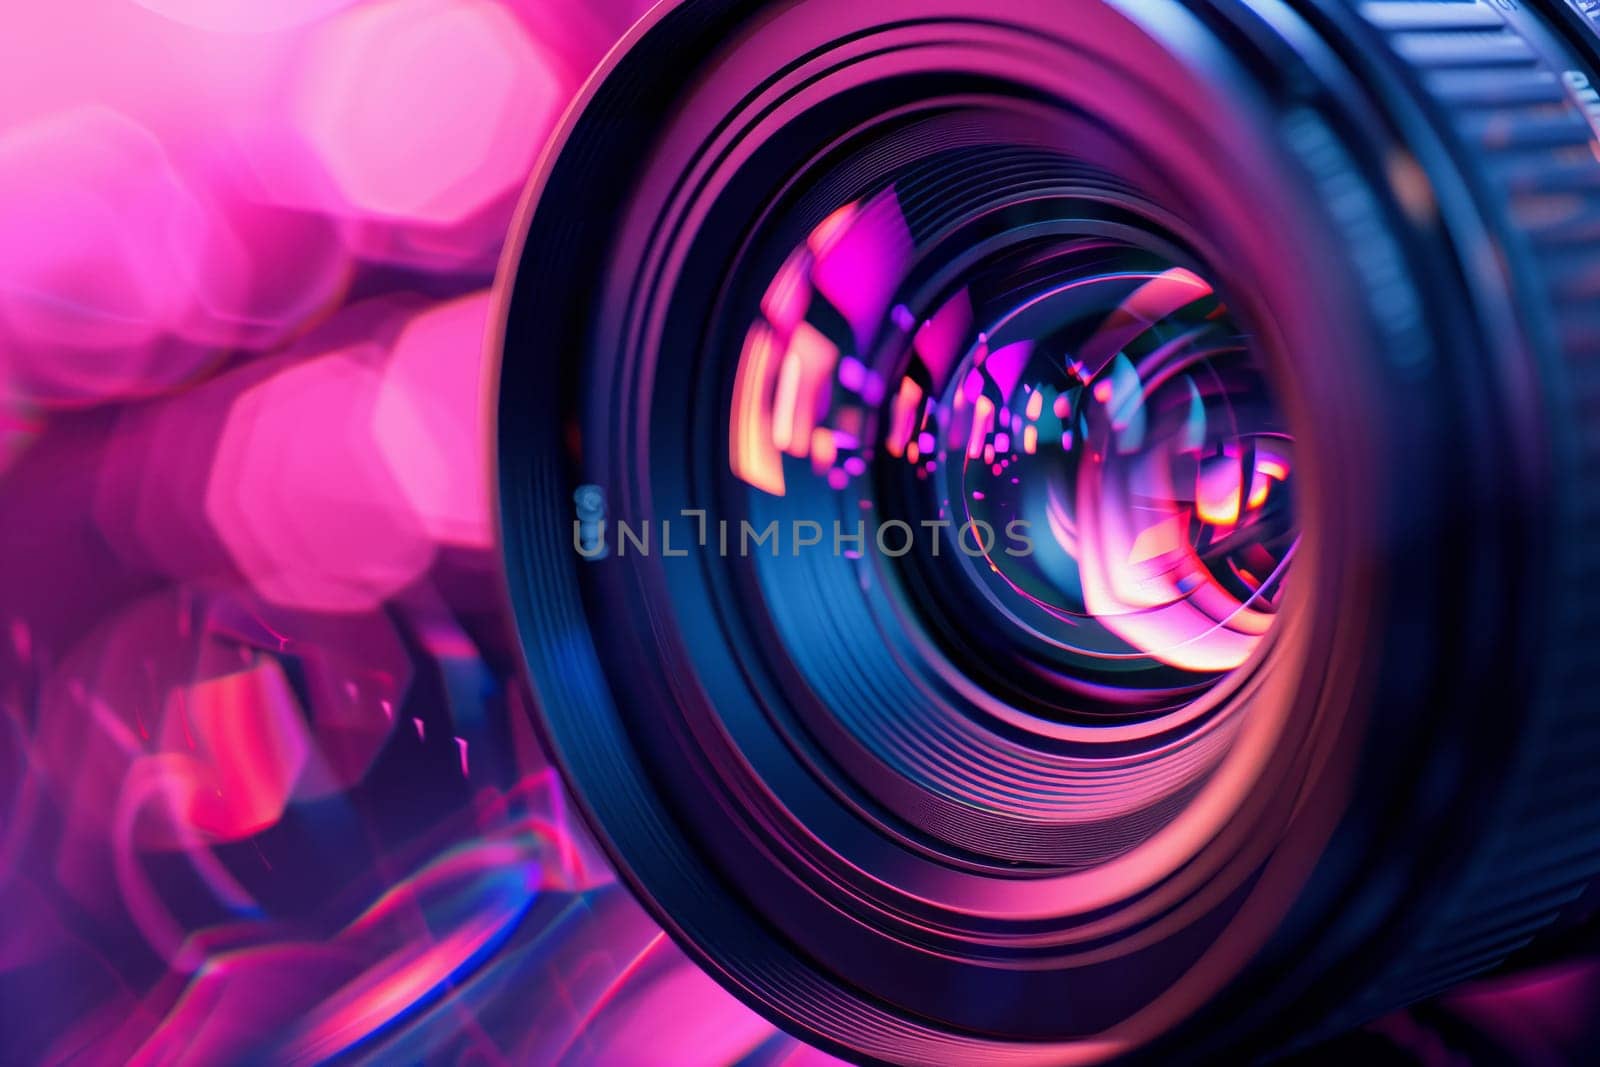 Vibrant purple camera lens close up on a pink background by richwolf